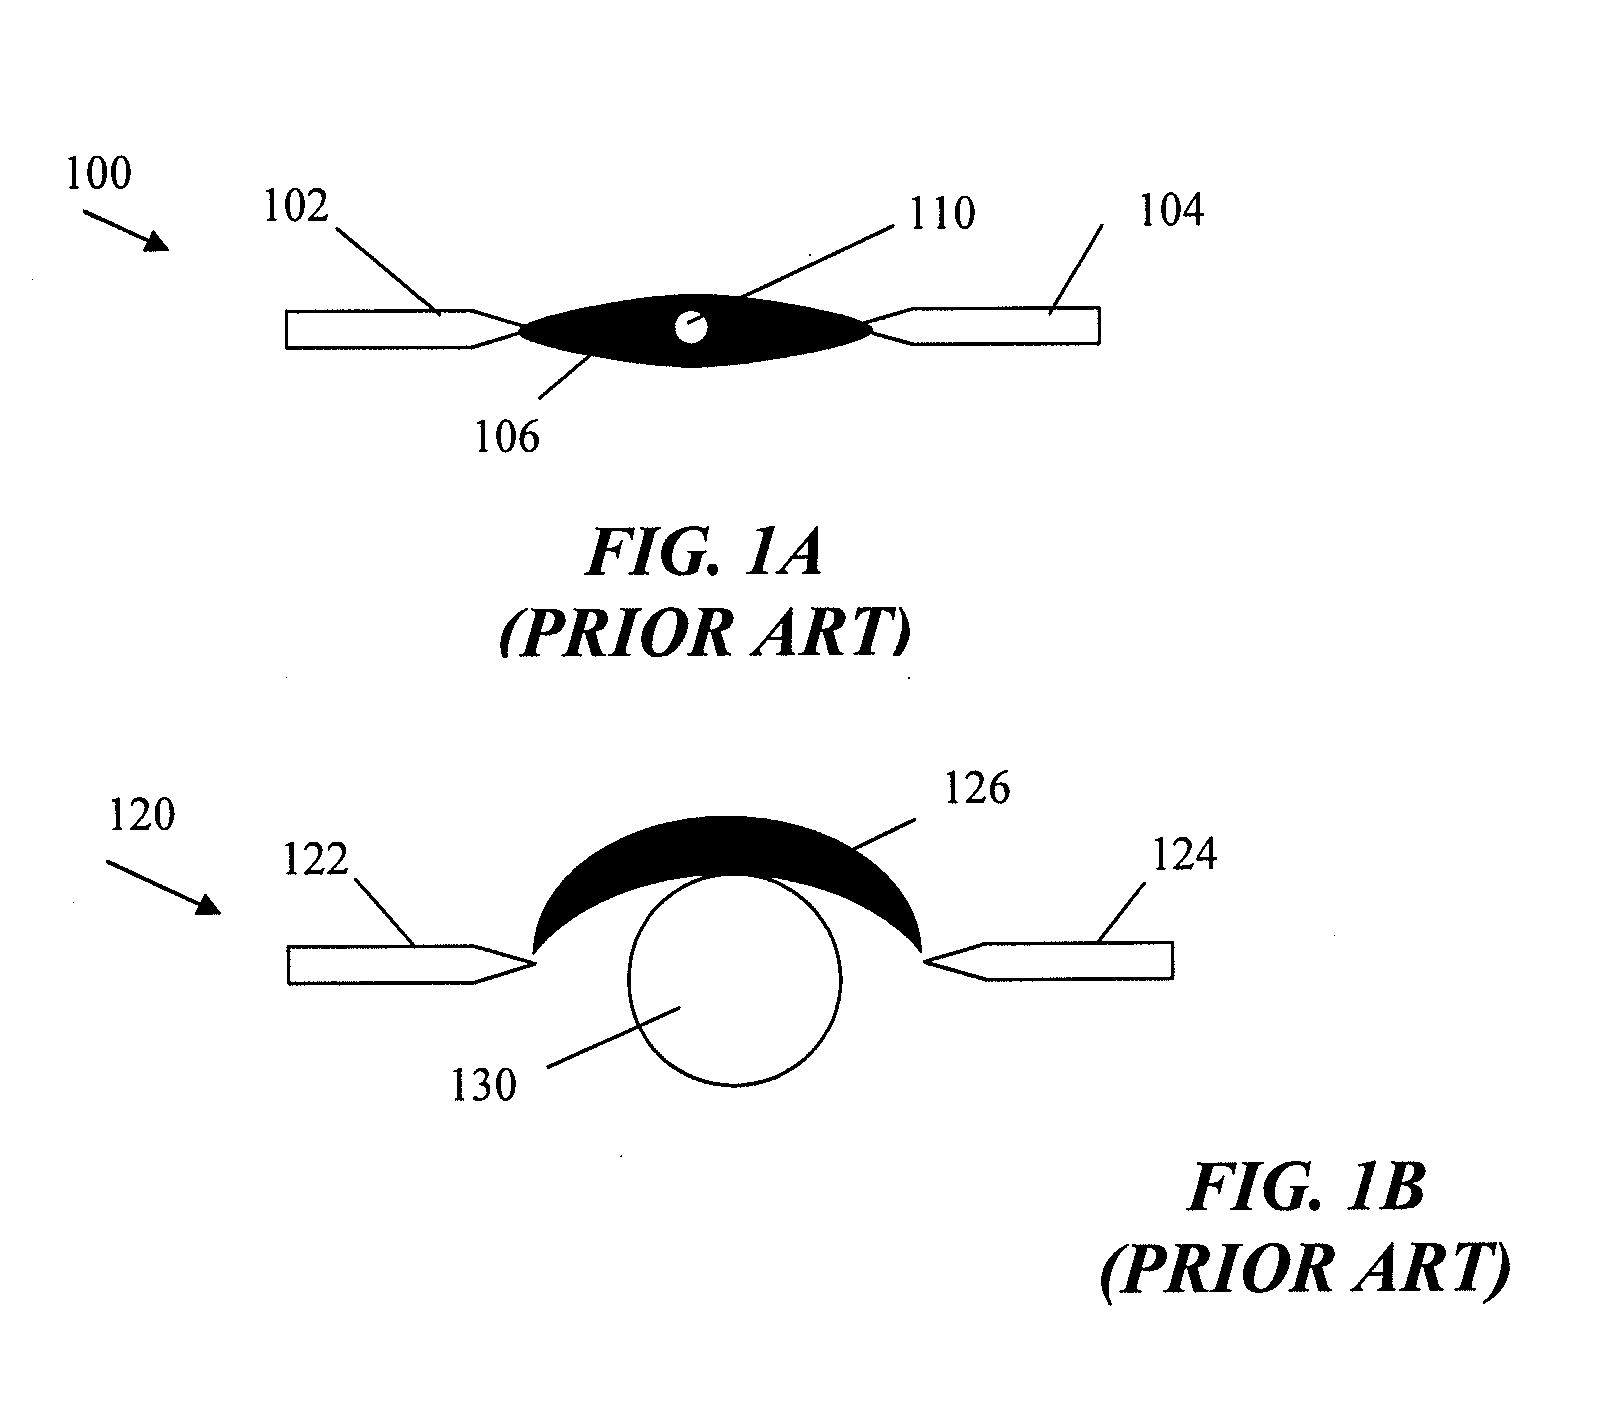 Multi-electrode system with vibrating electrodes